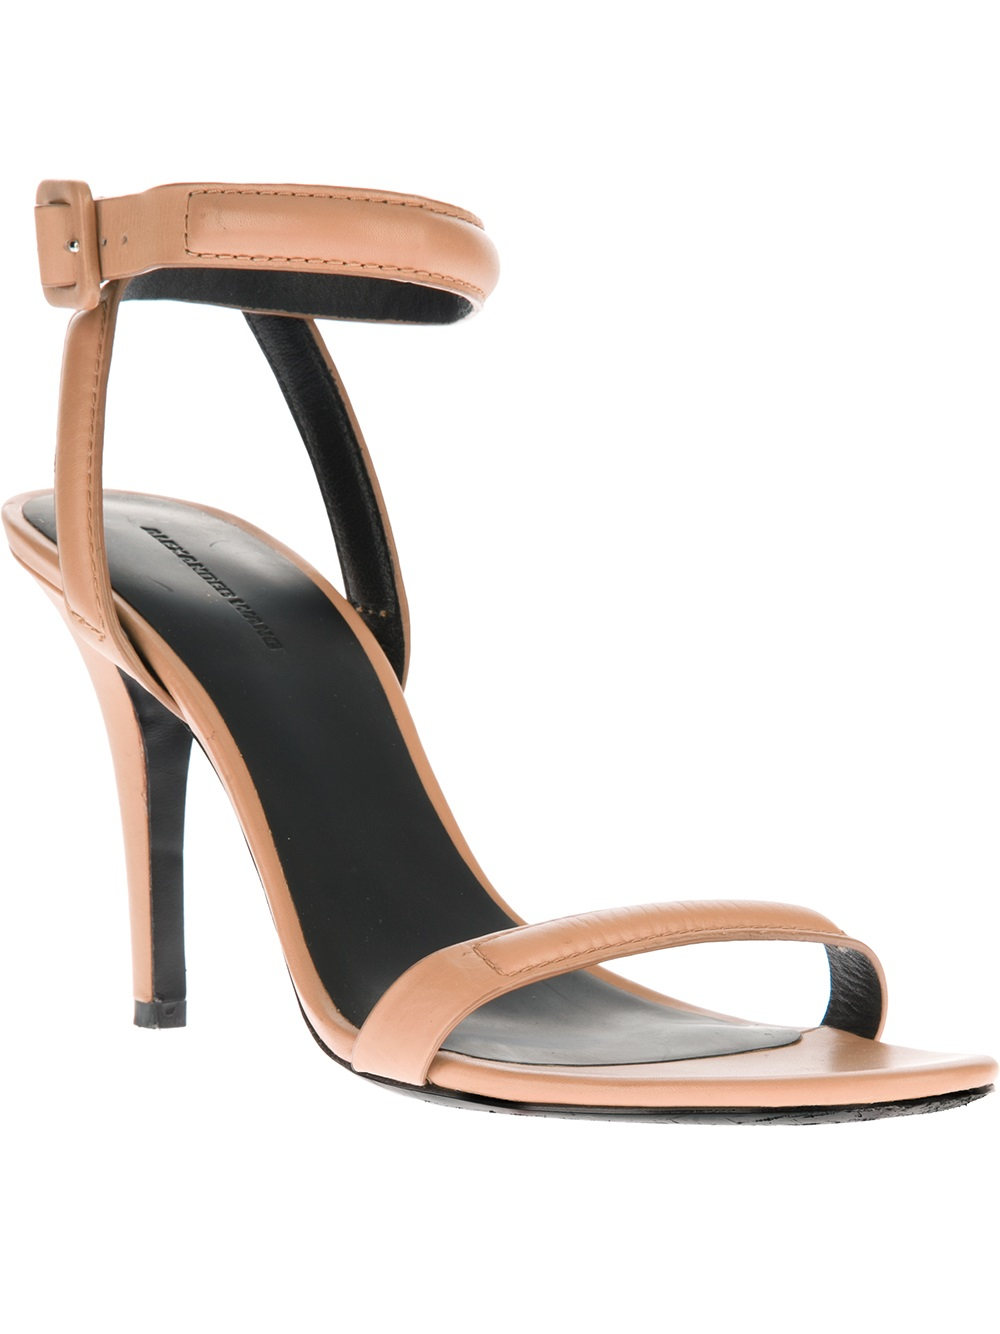 Alexander Wang Strappy Sandal in Pink - Lyst